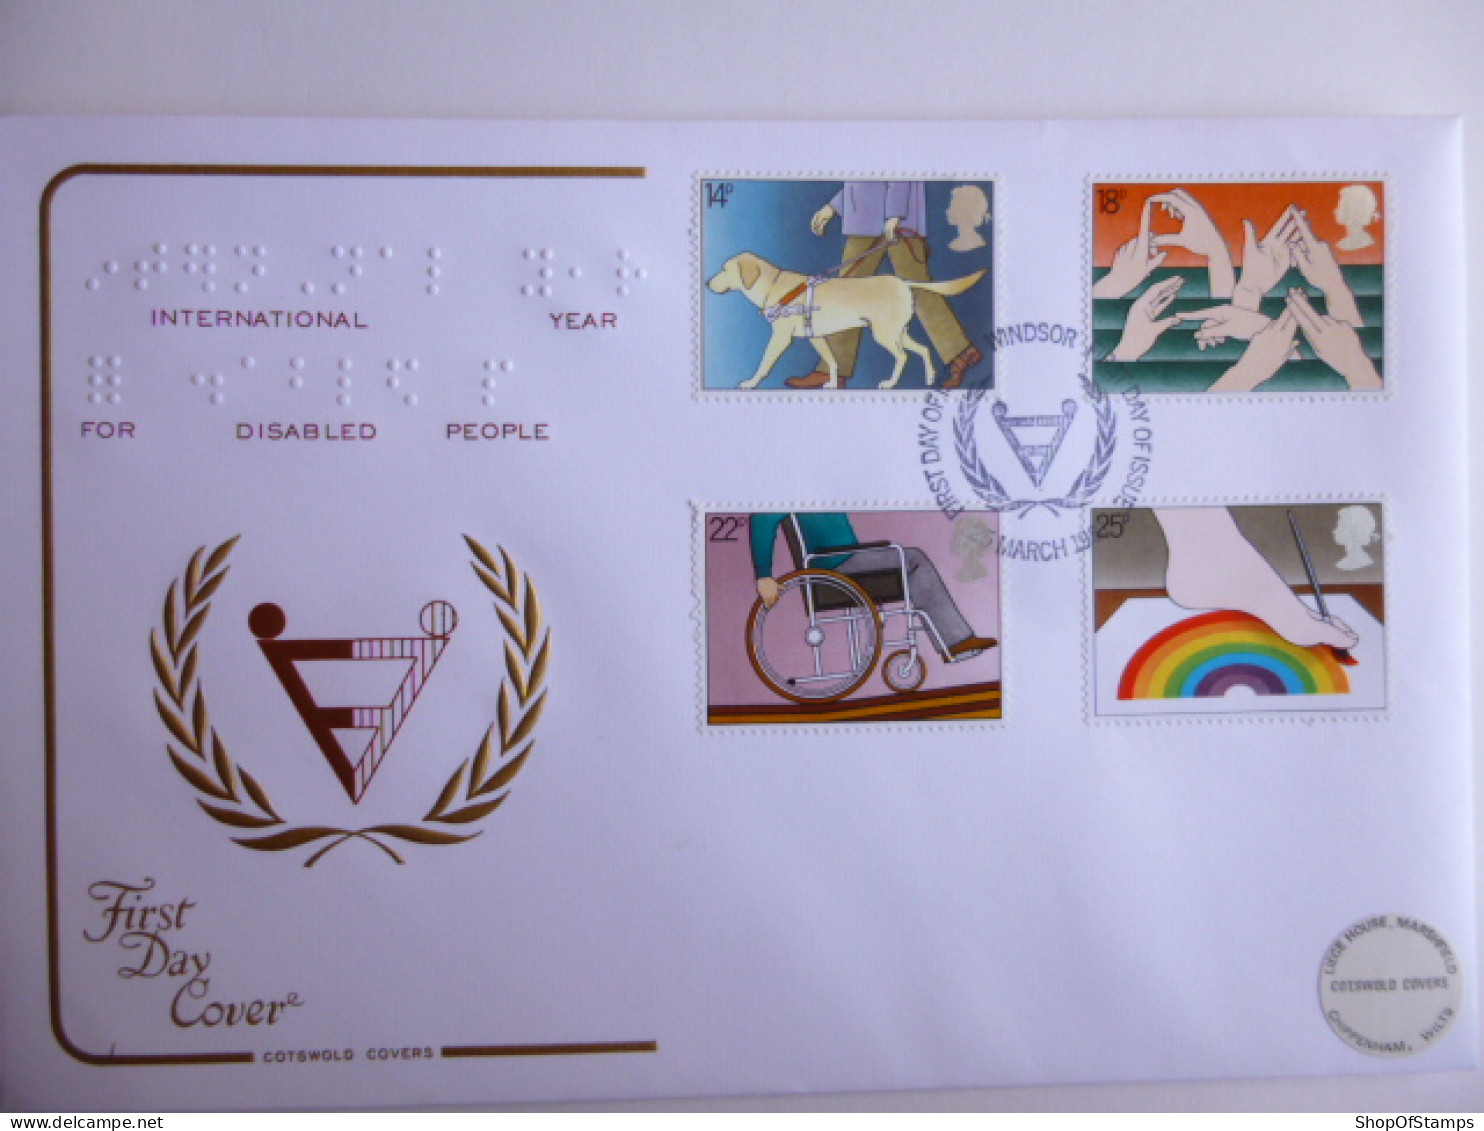 GREAT BRITAIN SG 1147-50 INTERNATIONAL YEAR OF THE DISABLED   FDC WINDSOR With BRAIL PRINT - Unclassified